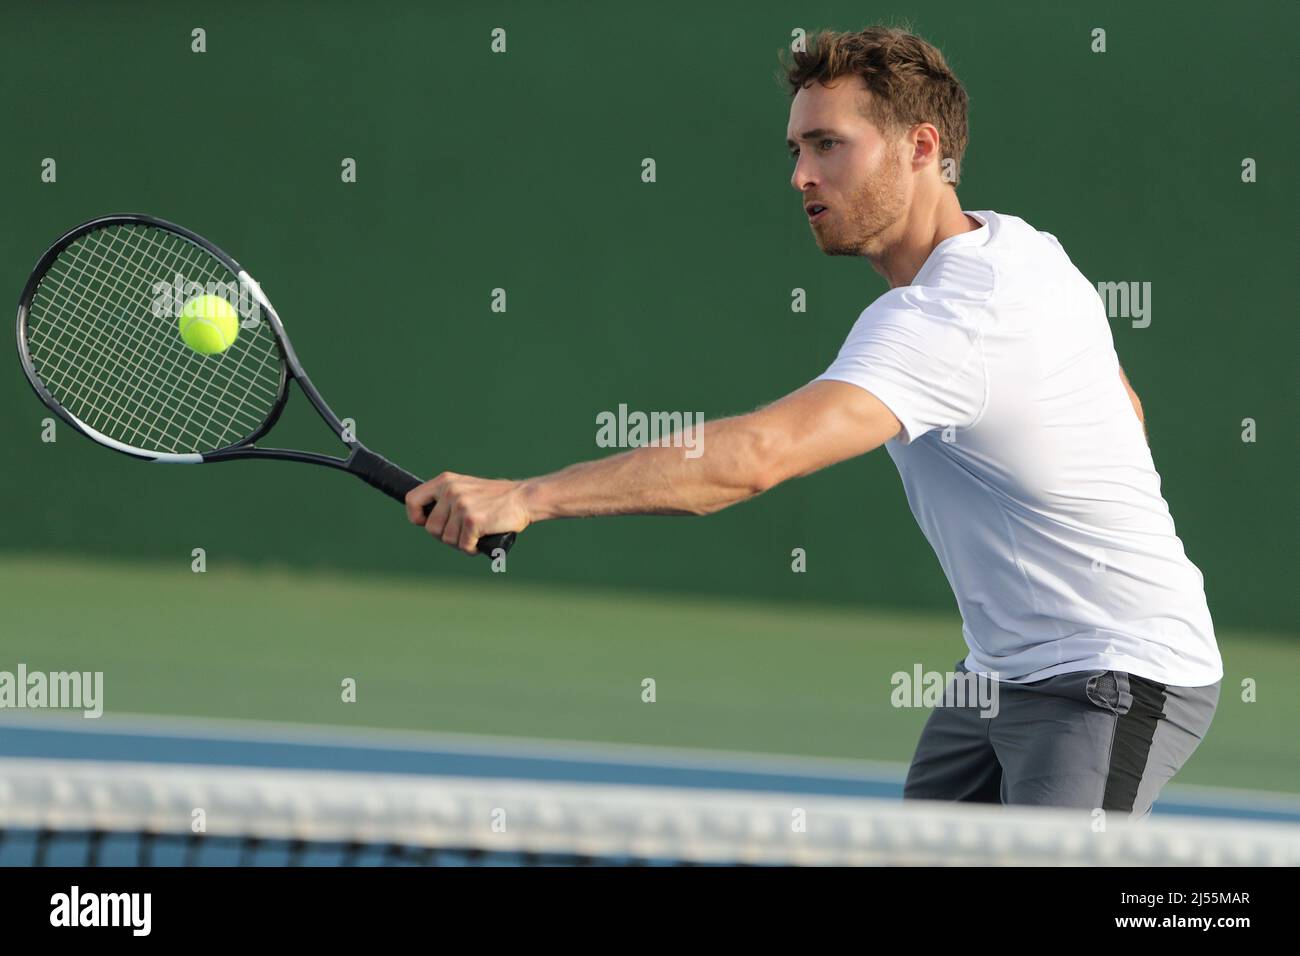 Tennis player hitting ball with backhand racket on hard court. Man playing game returning ball portrait Stock Photo